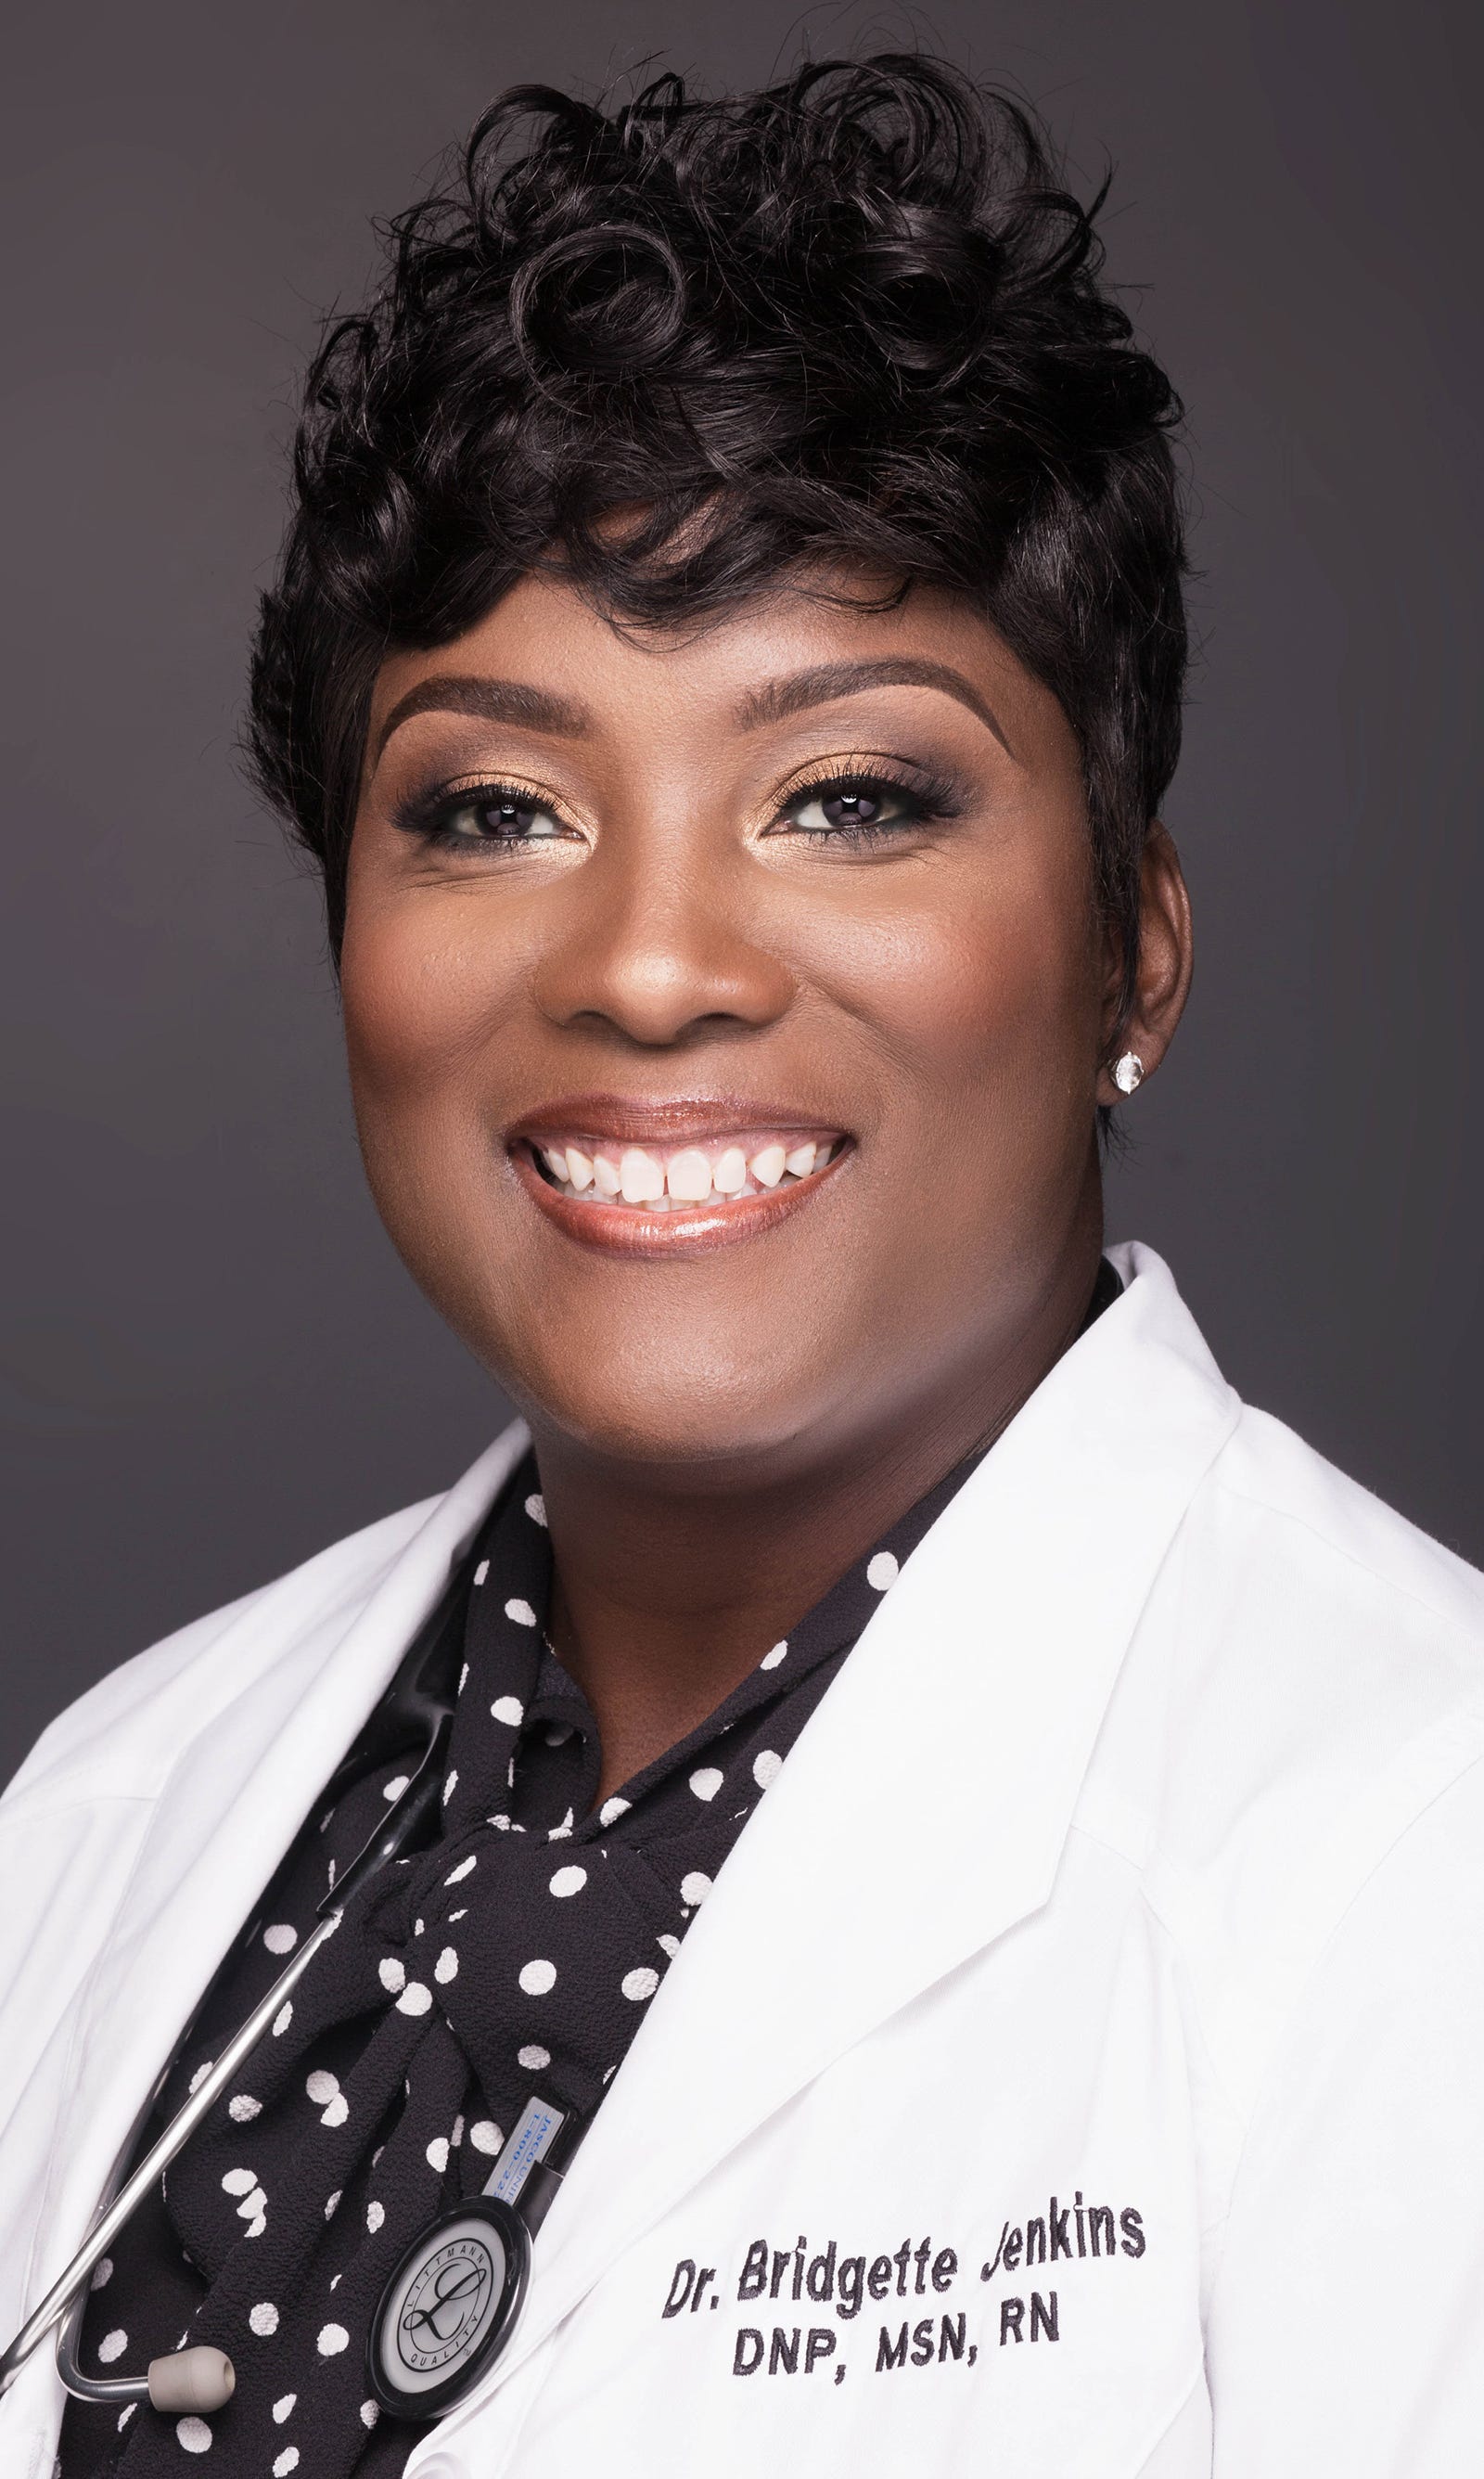 Bridgette Jenkins, a nurse and professor of nursing in Houston, has specialized in women's health for more than 20 years.